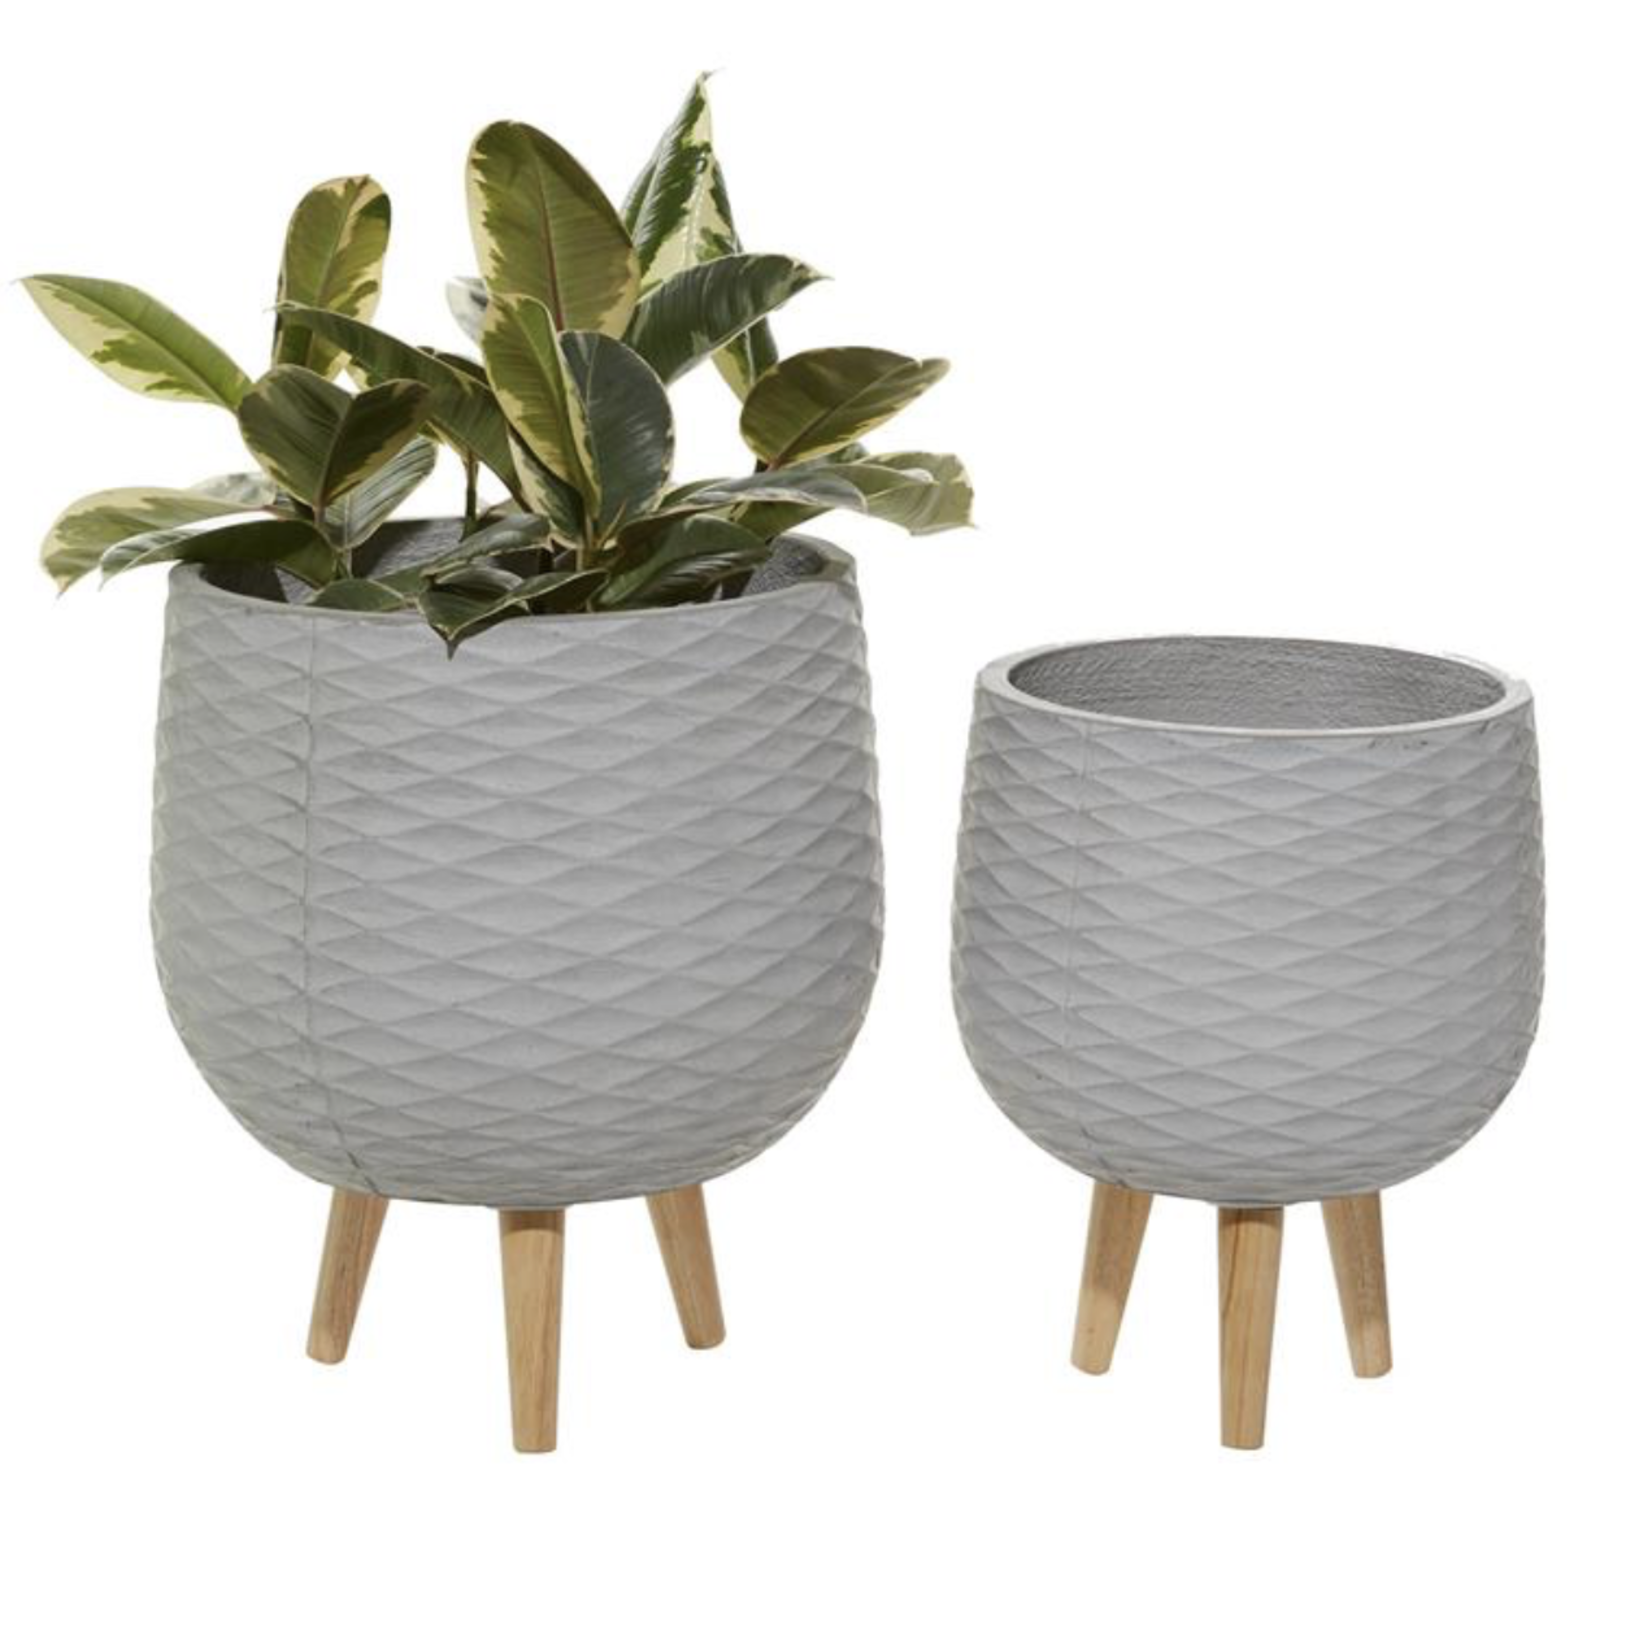 14”h x 12.5” SMALL LIGHT GREY POLYSTONE CONTEMPORARY PLANTER WITH WOOD STAND (NOT WATER TIGHT)